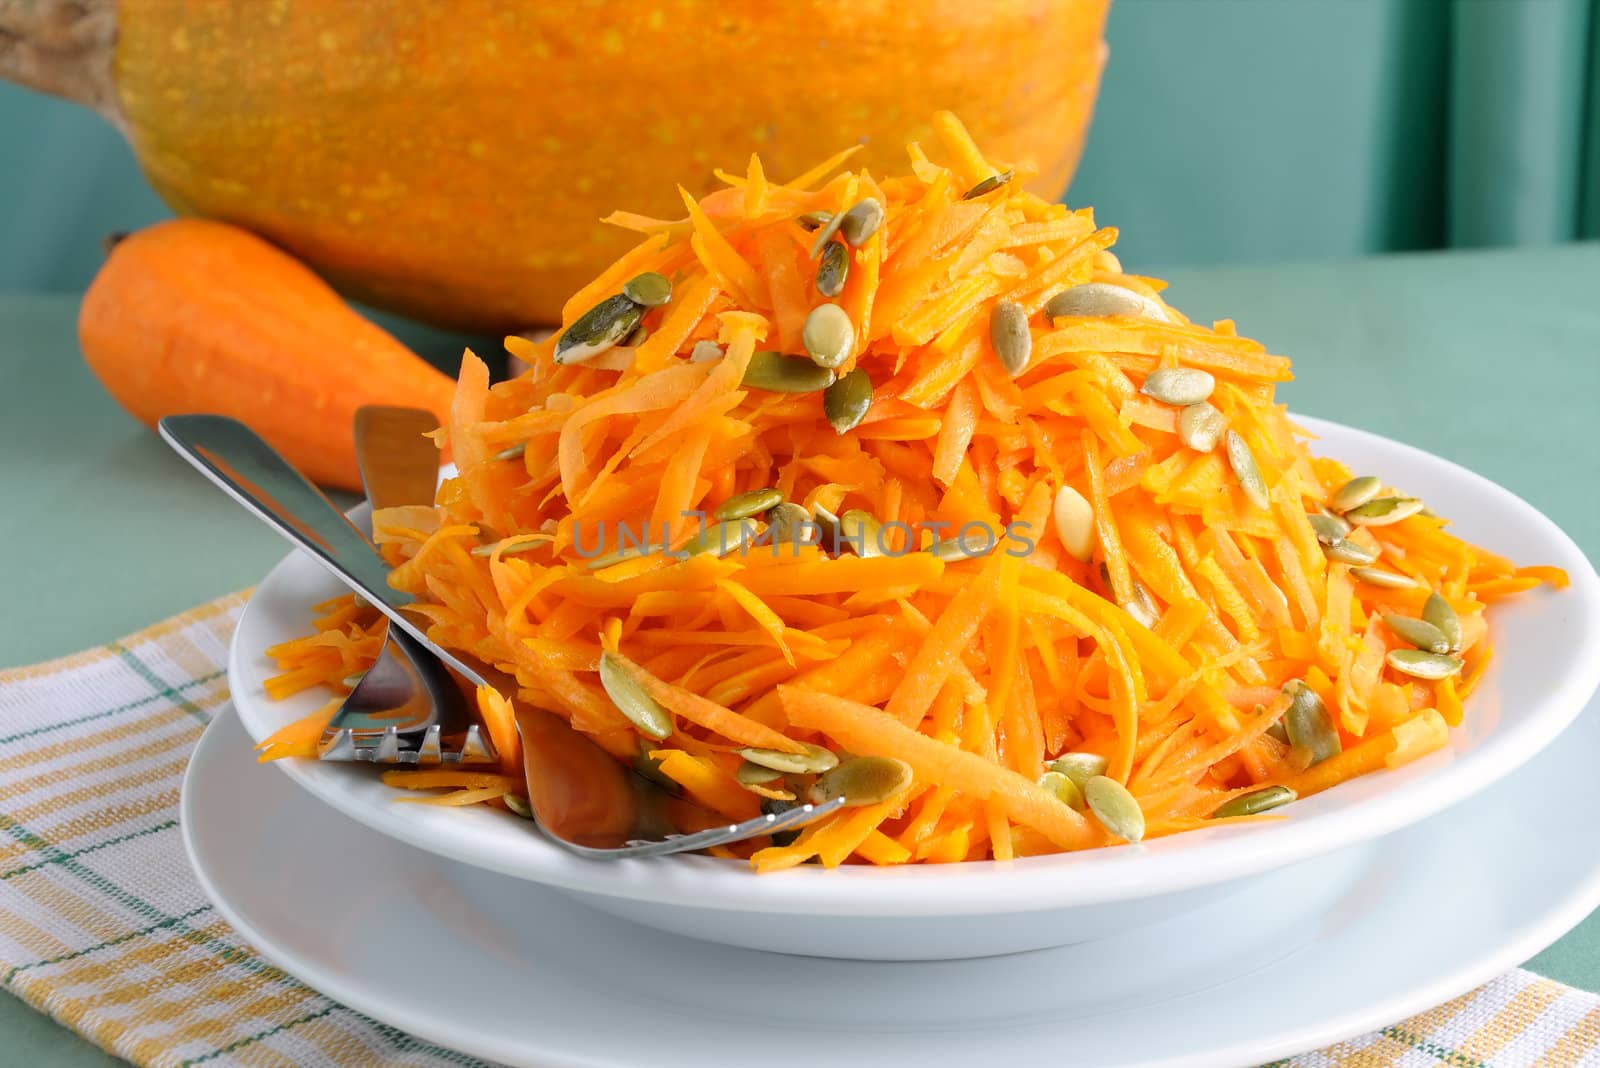 Salad of pumpkin and carrot with pumpkin seeds by Apolonia